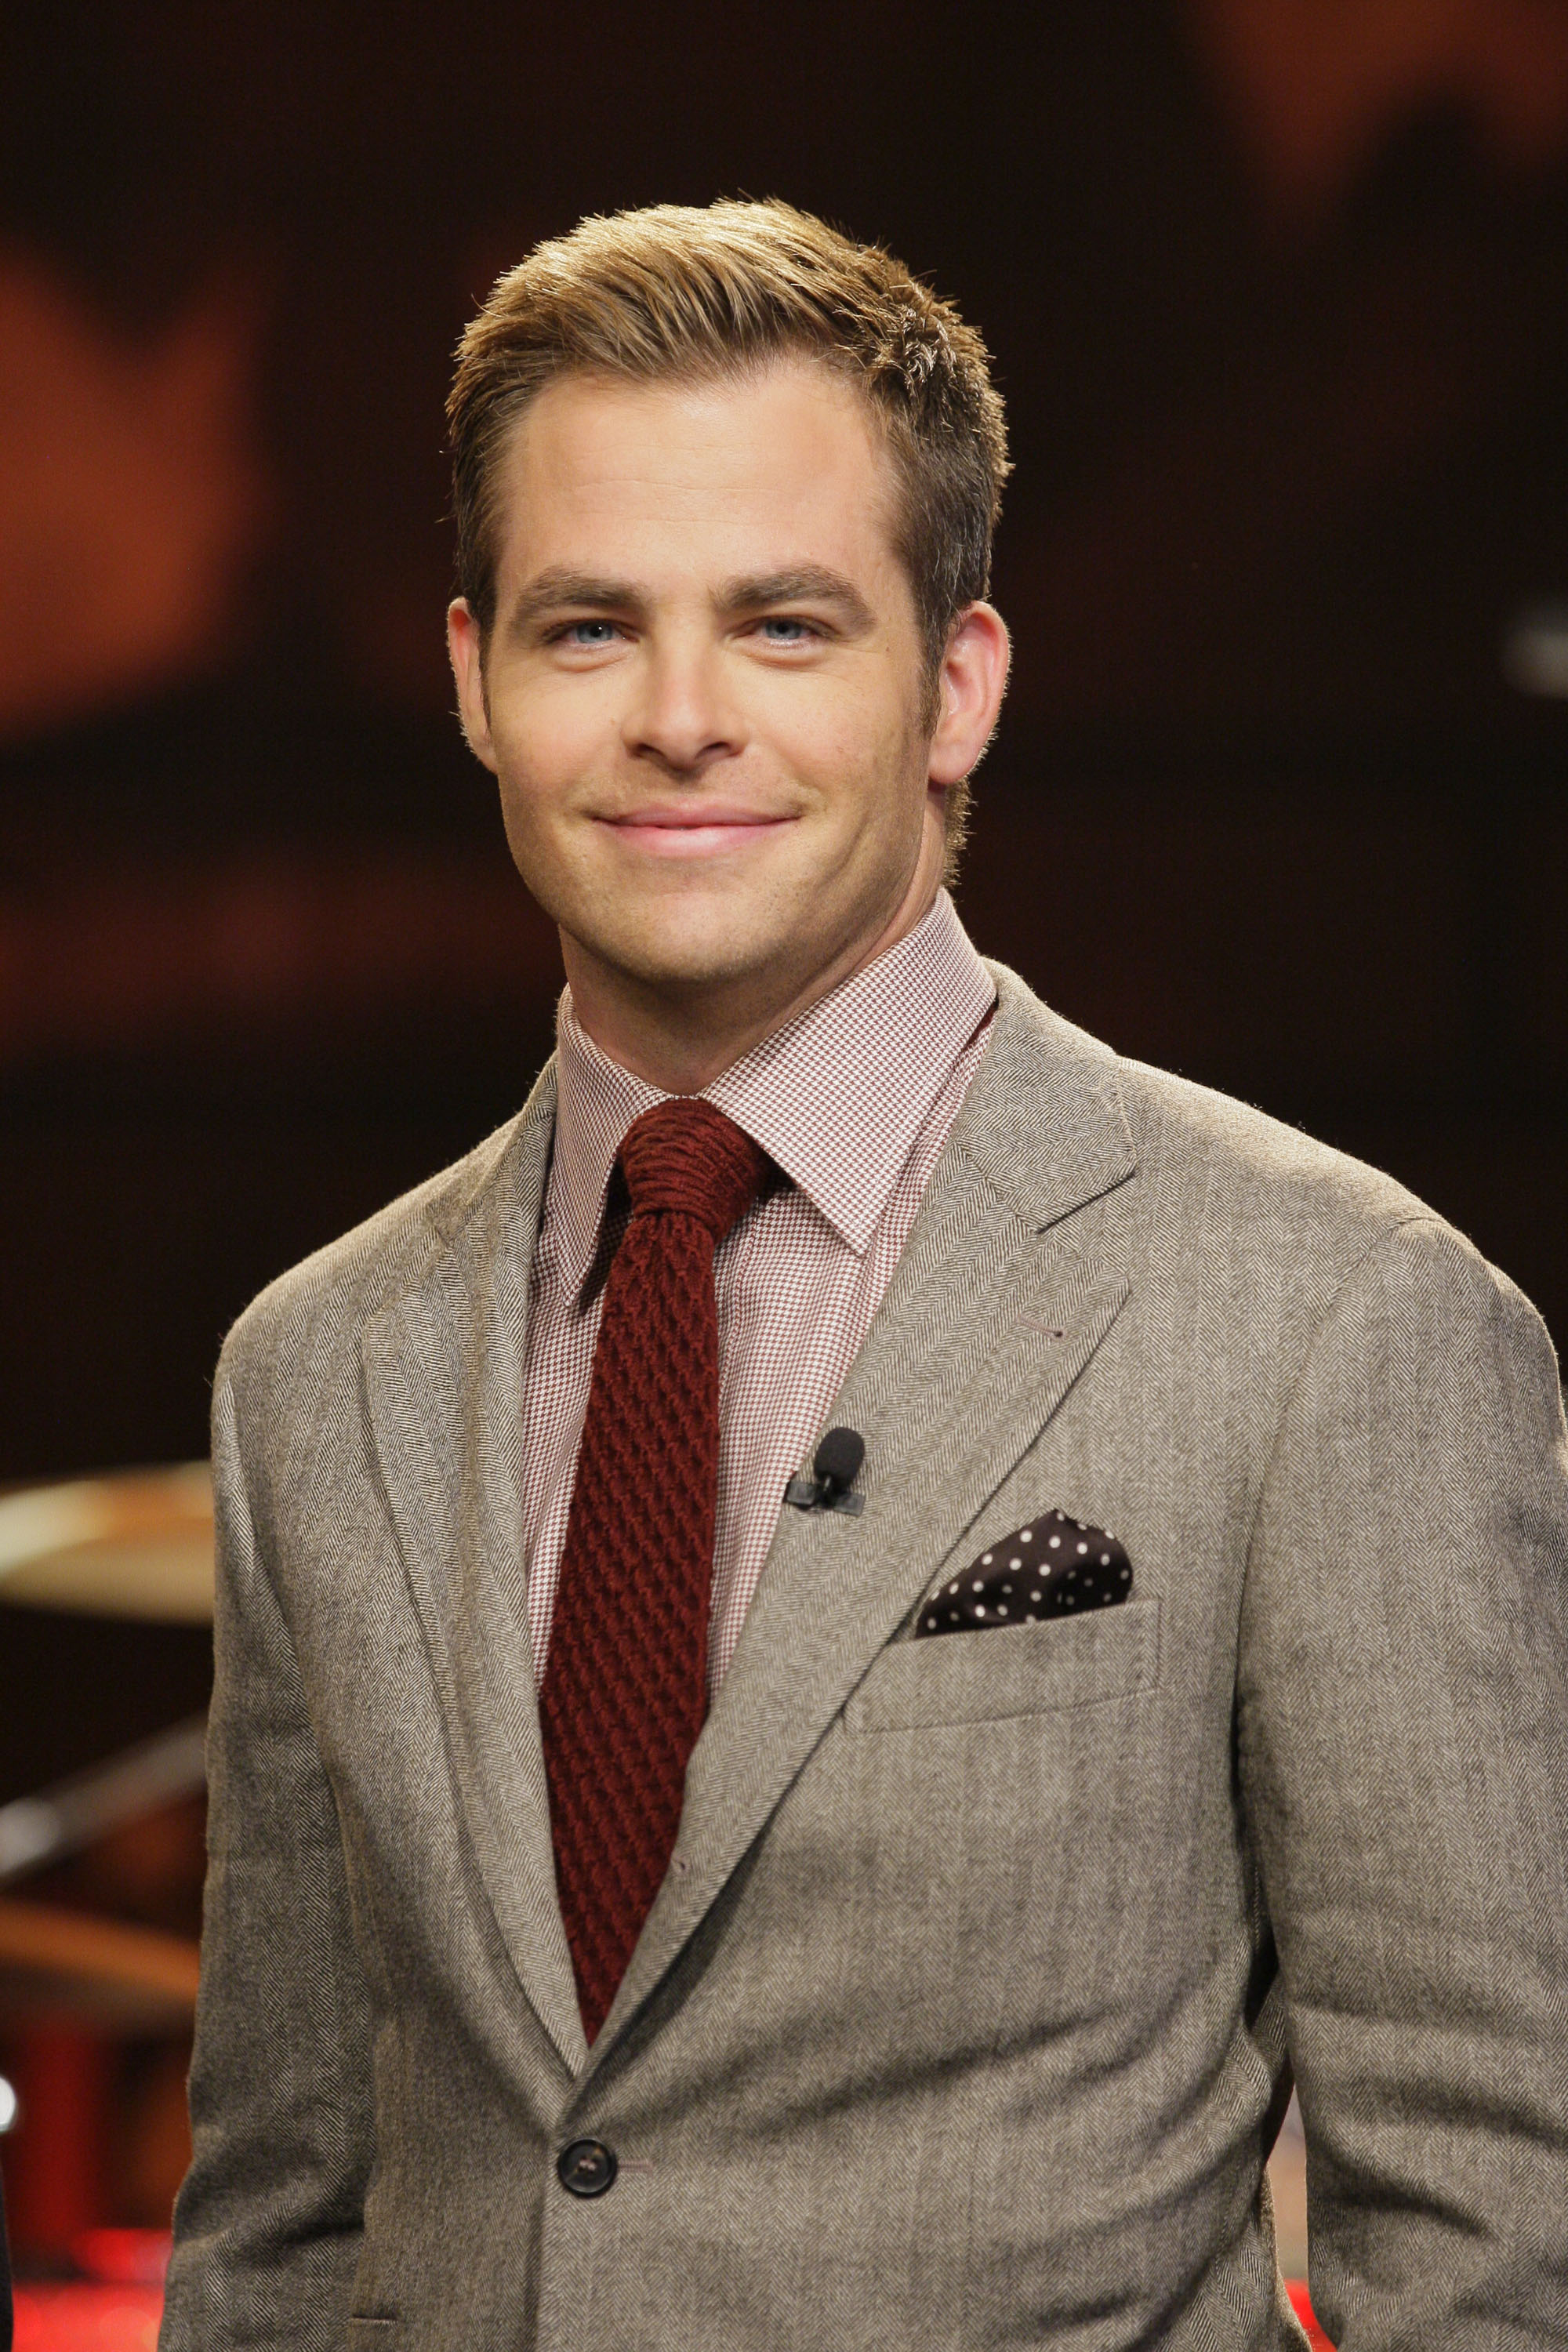 Chris Pine appears on "The Tonight Show with Jay Leno" on June 22, 2012 | Source: Getty Images